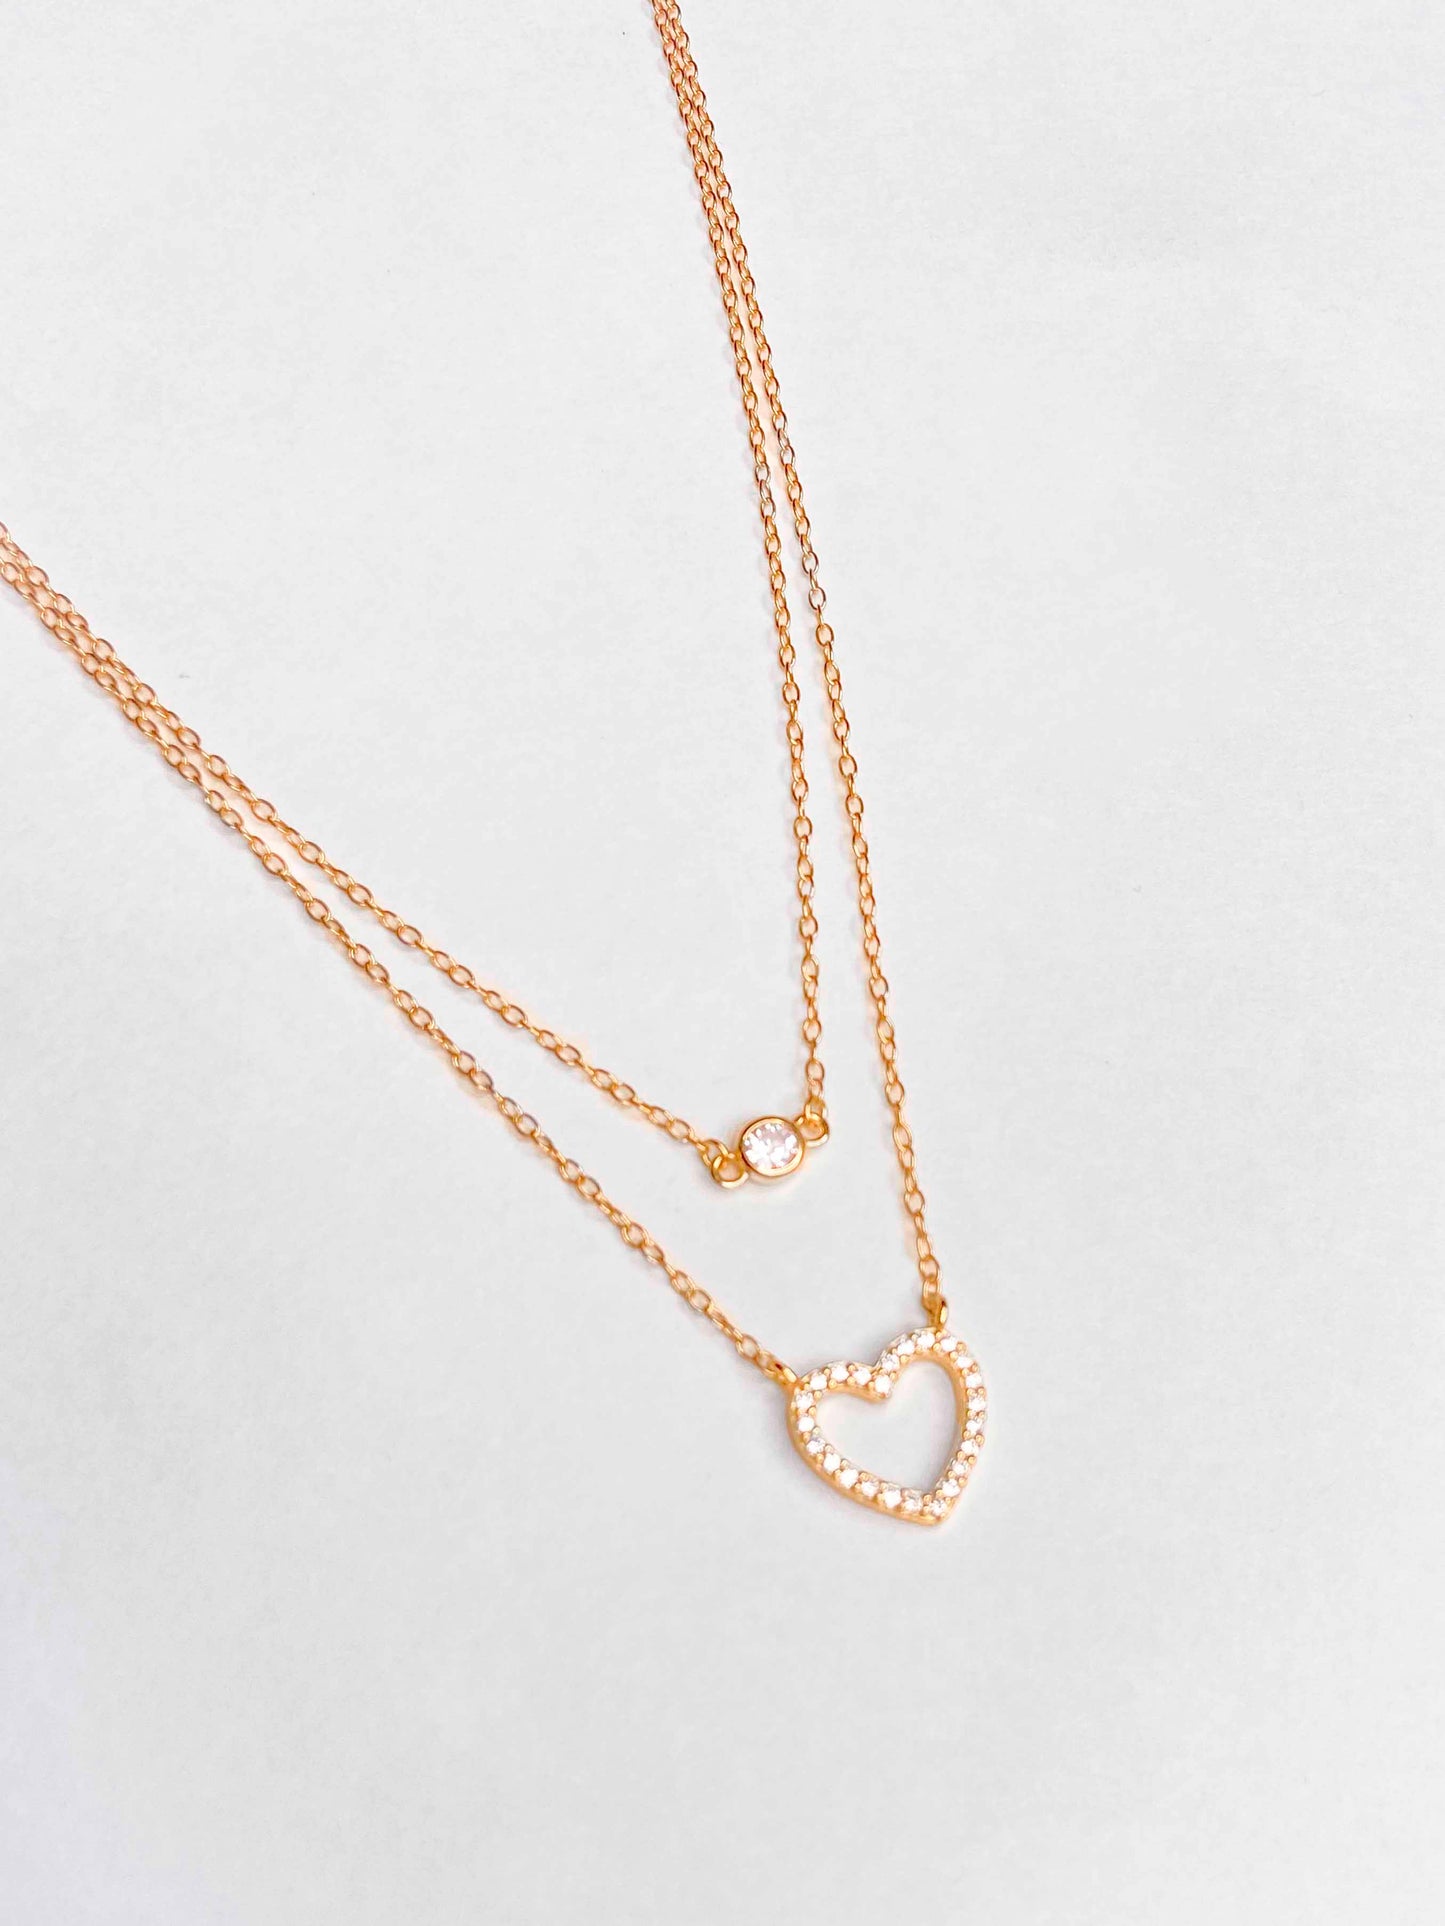 Gold-plated 925 sterling silver double-layer necklace delicate clavicle chain zircon necklace.